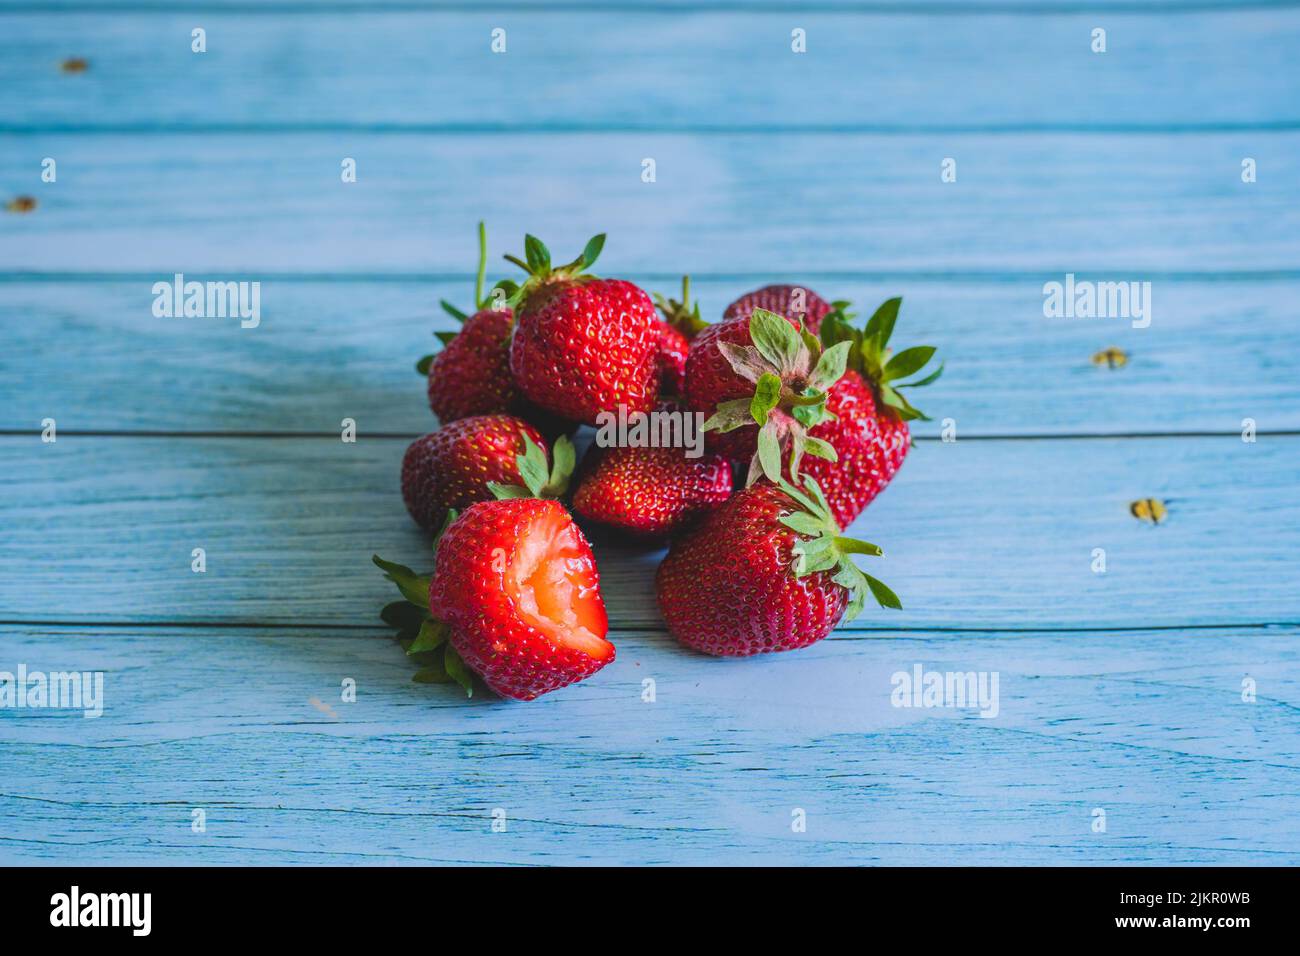 Fresh bitten strawberry. Ripe sweet strawberries on blue wooden table. Summer fruits concept.Food and drink space for text. Close up of red berries. H Stock Photo